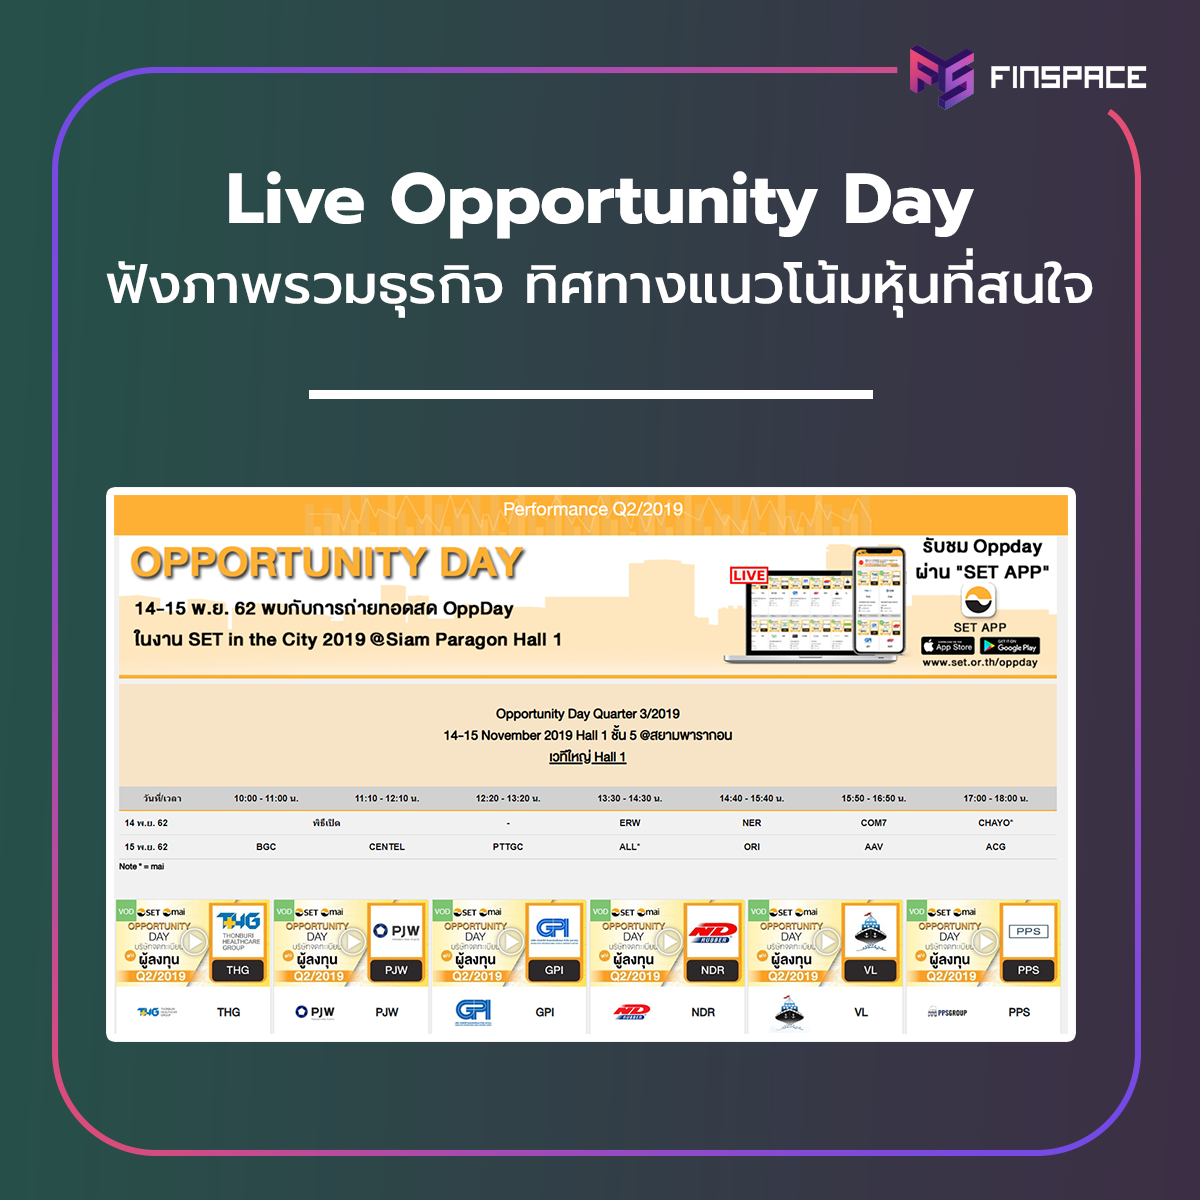 Live Opportunity Day คือ